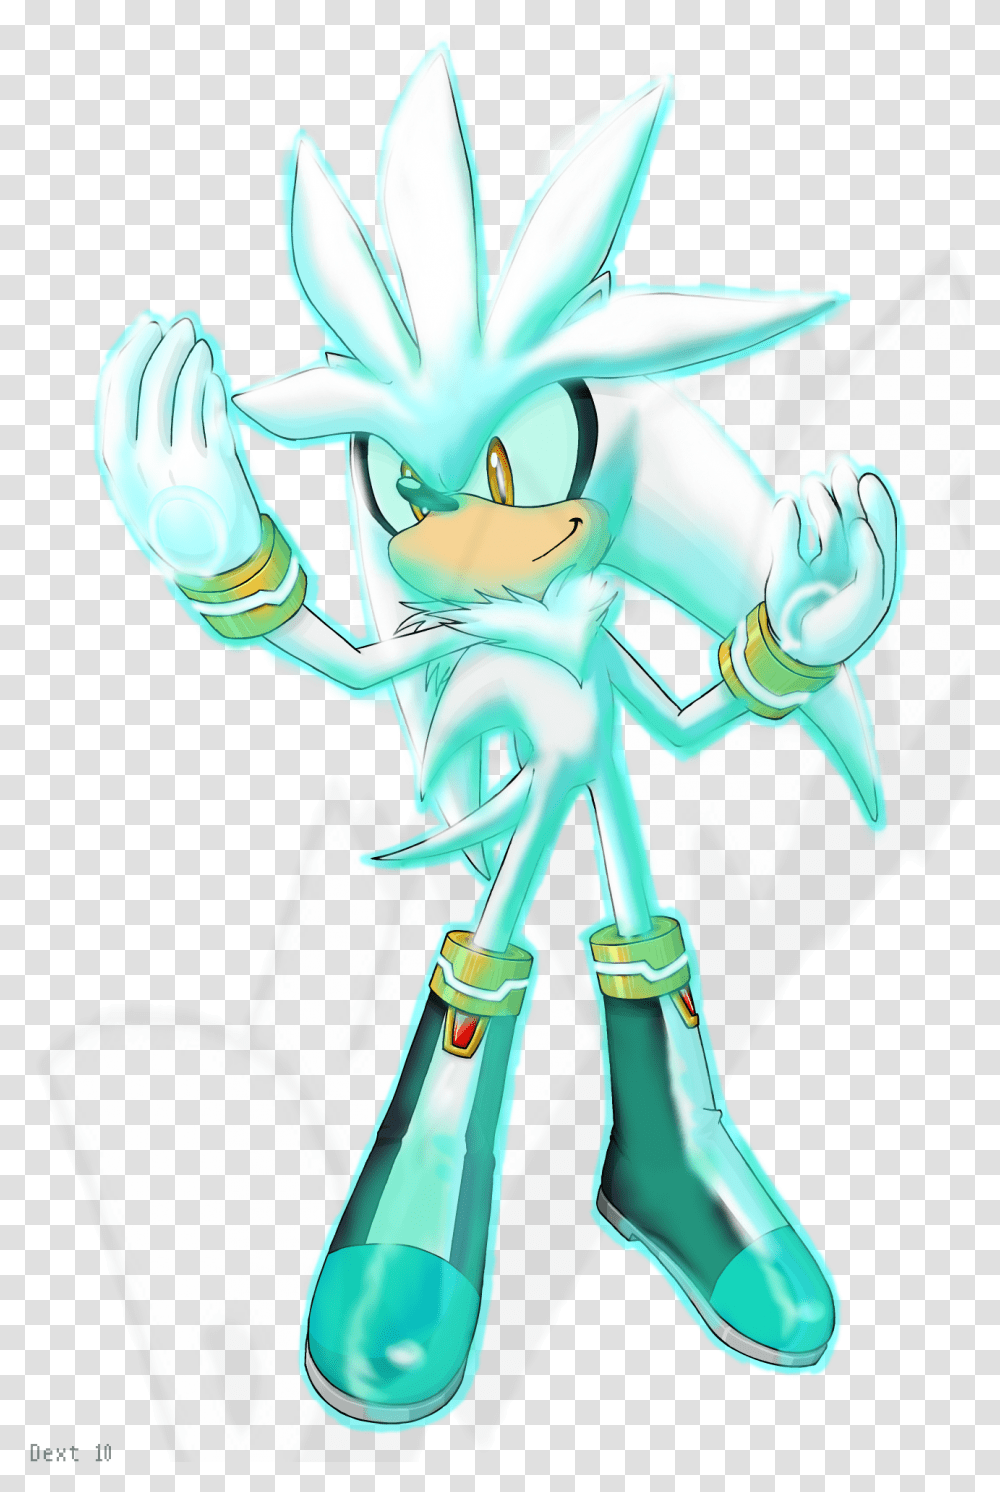 Silver The Hedgehog Images Silver Hd Wallpaper And Silver The Hedgehog Fan Art, Toy, Costume, Blow Dryer Transparent Png